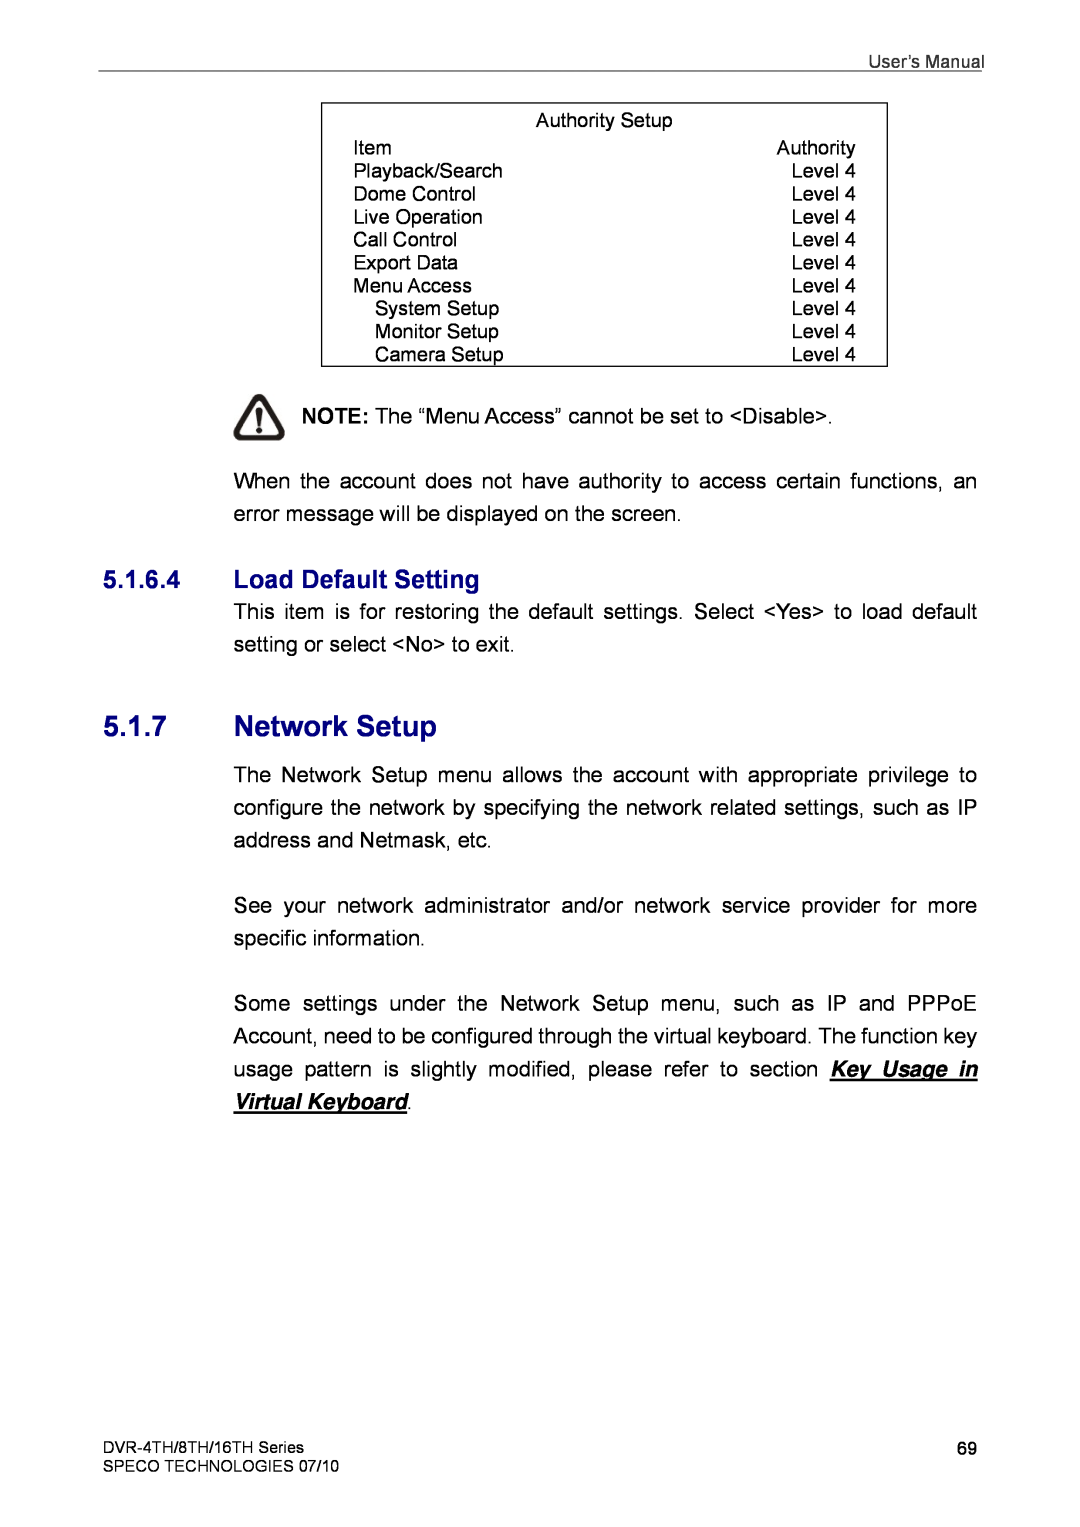 Speco Technologies 4TH, 8TH, 16TH user manual Network Setup, Load Default Setting 